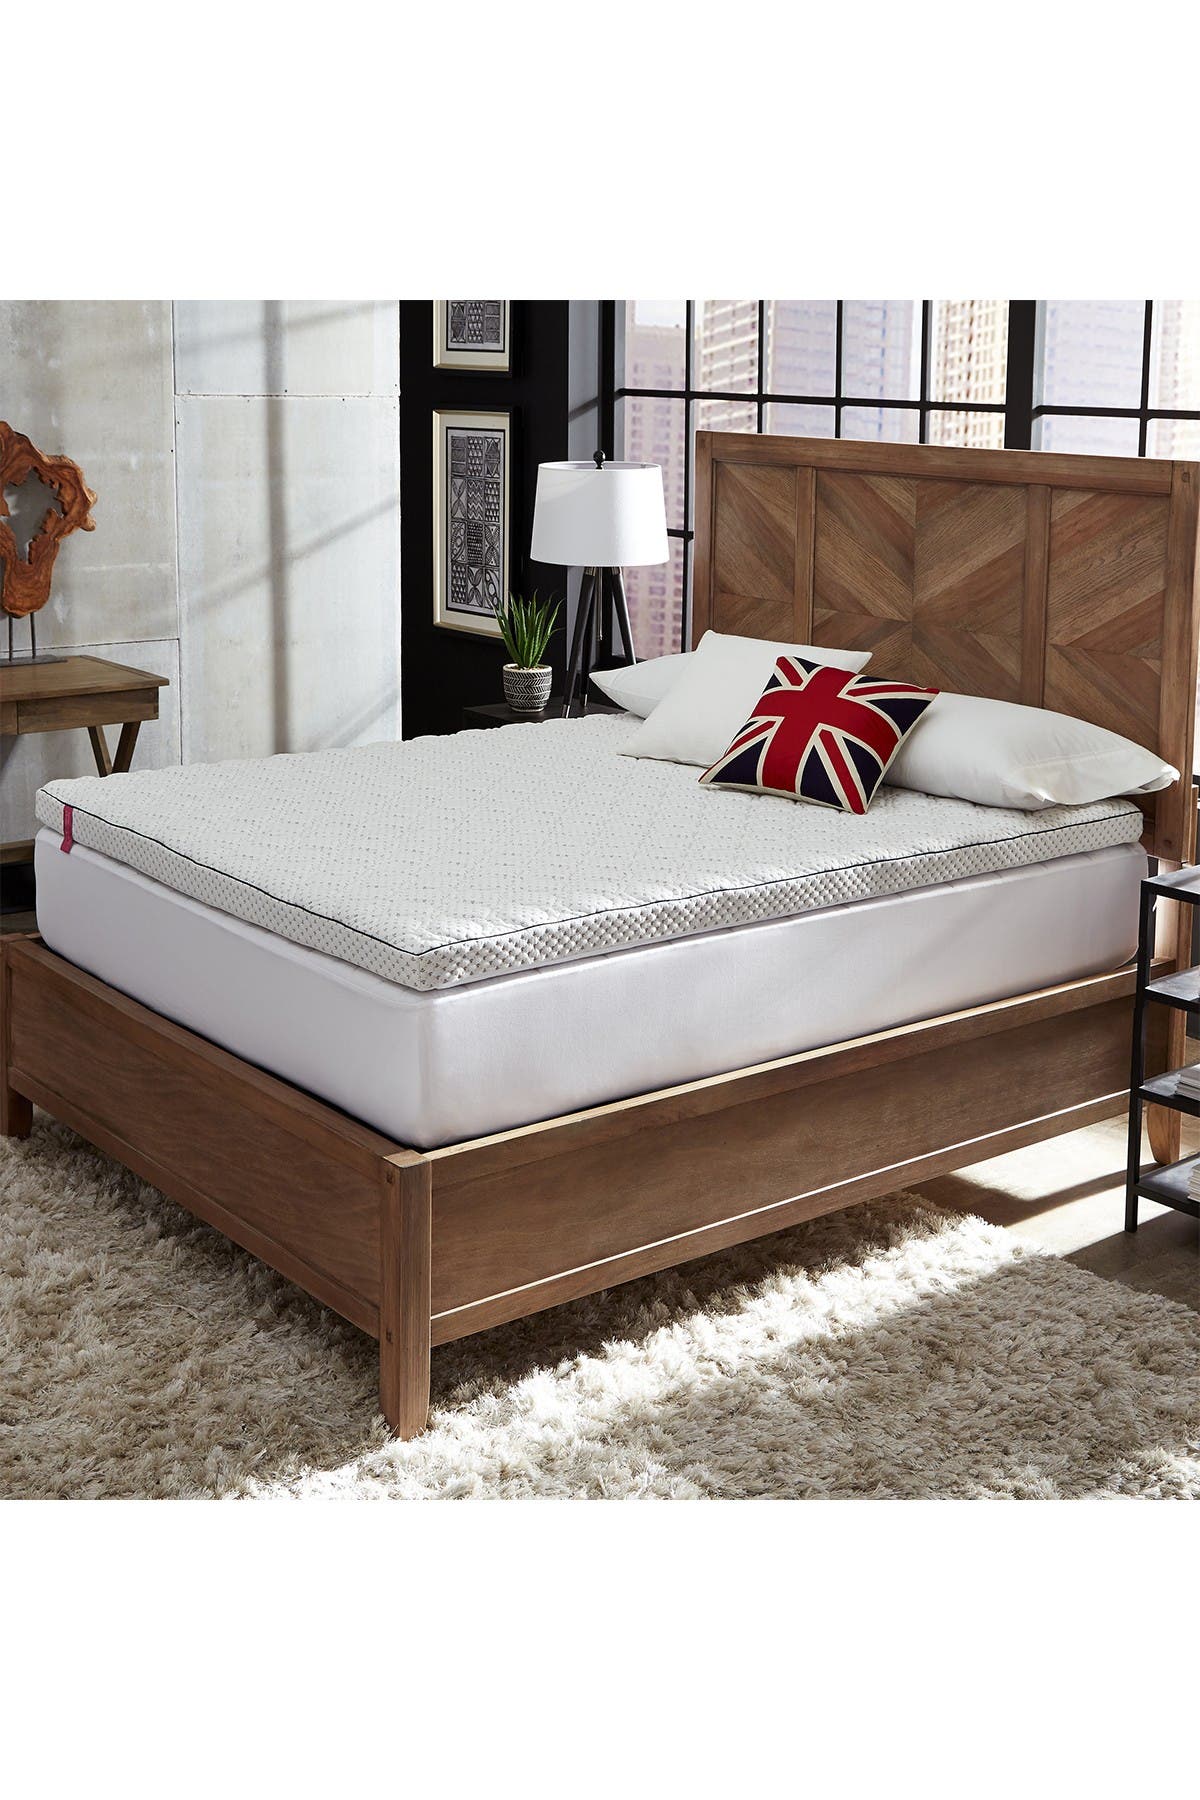 Rio Home Kensington Manor By Behrens 3 Inch Charcoal Infused Memory Foam Supreme King Mattress Topper In Whit In White